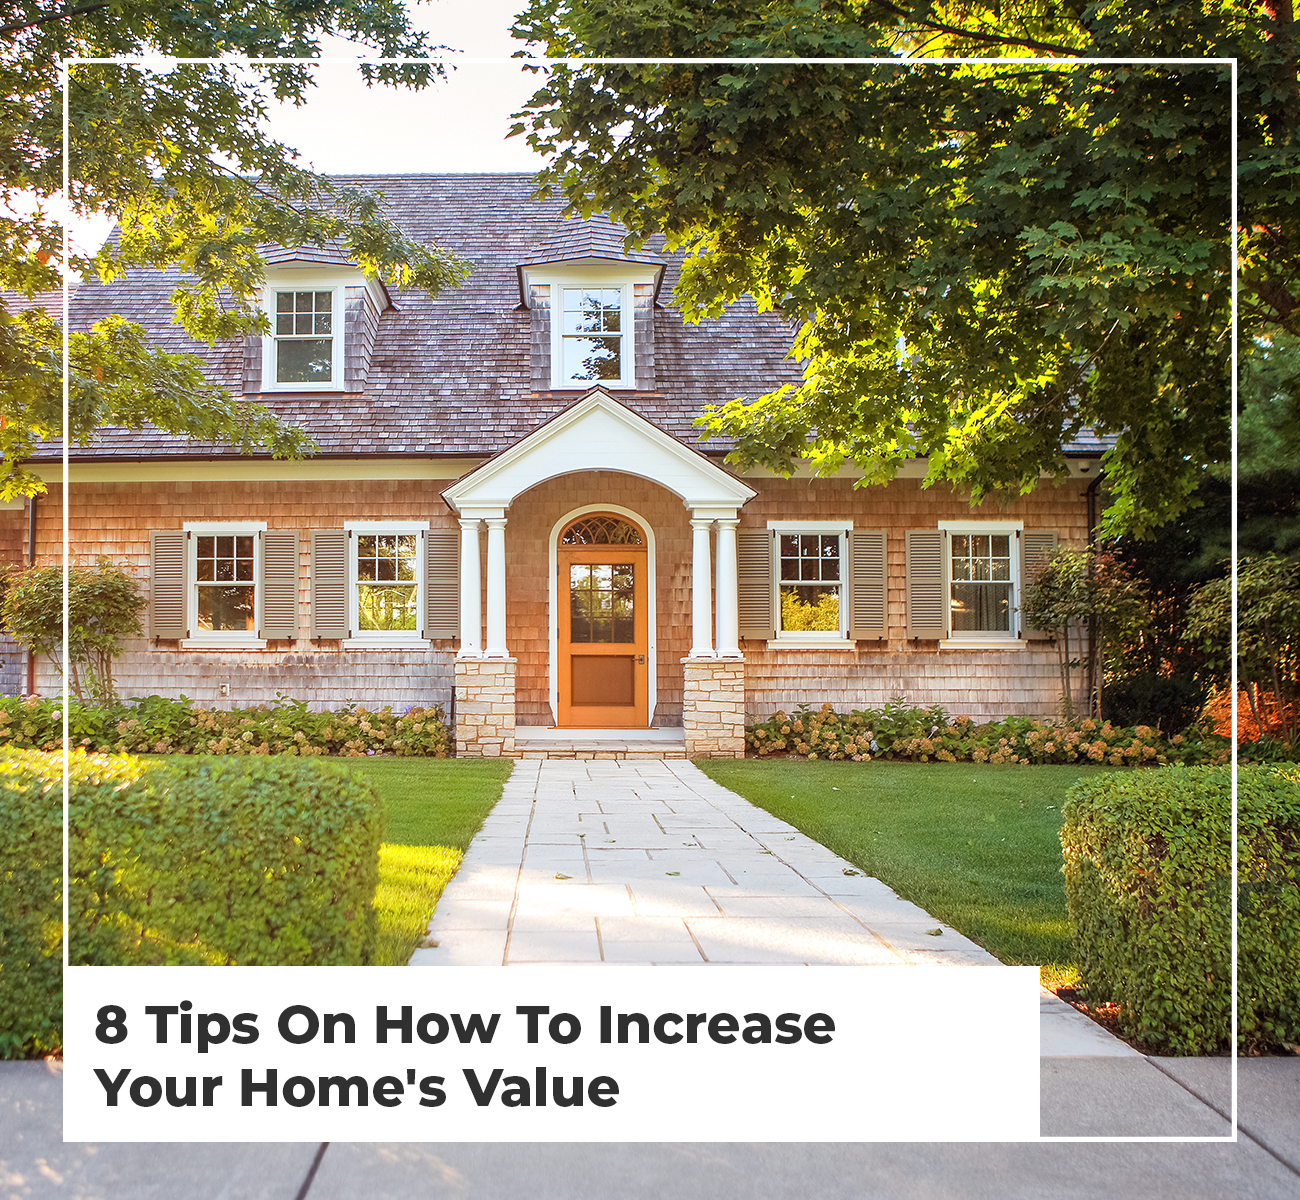 8 Tips On How To Increase Your Home's Value